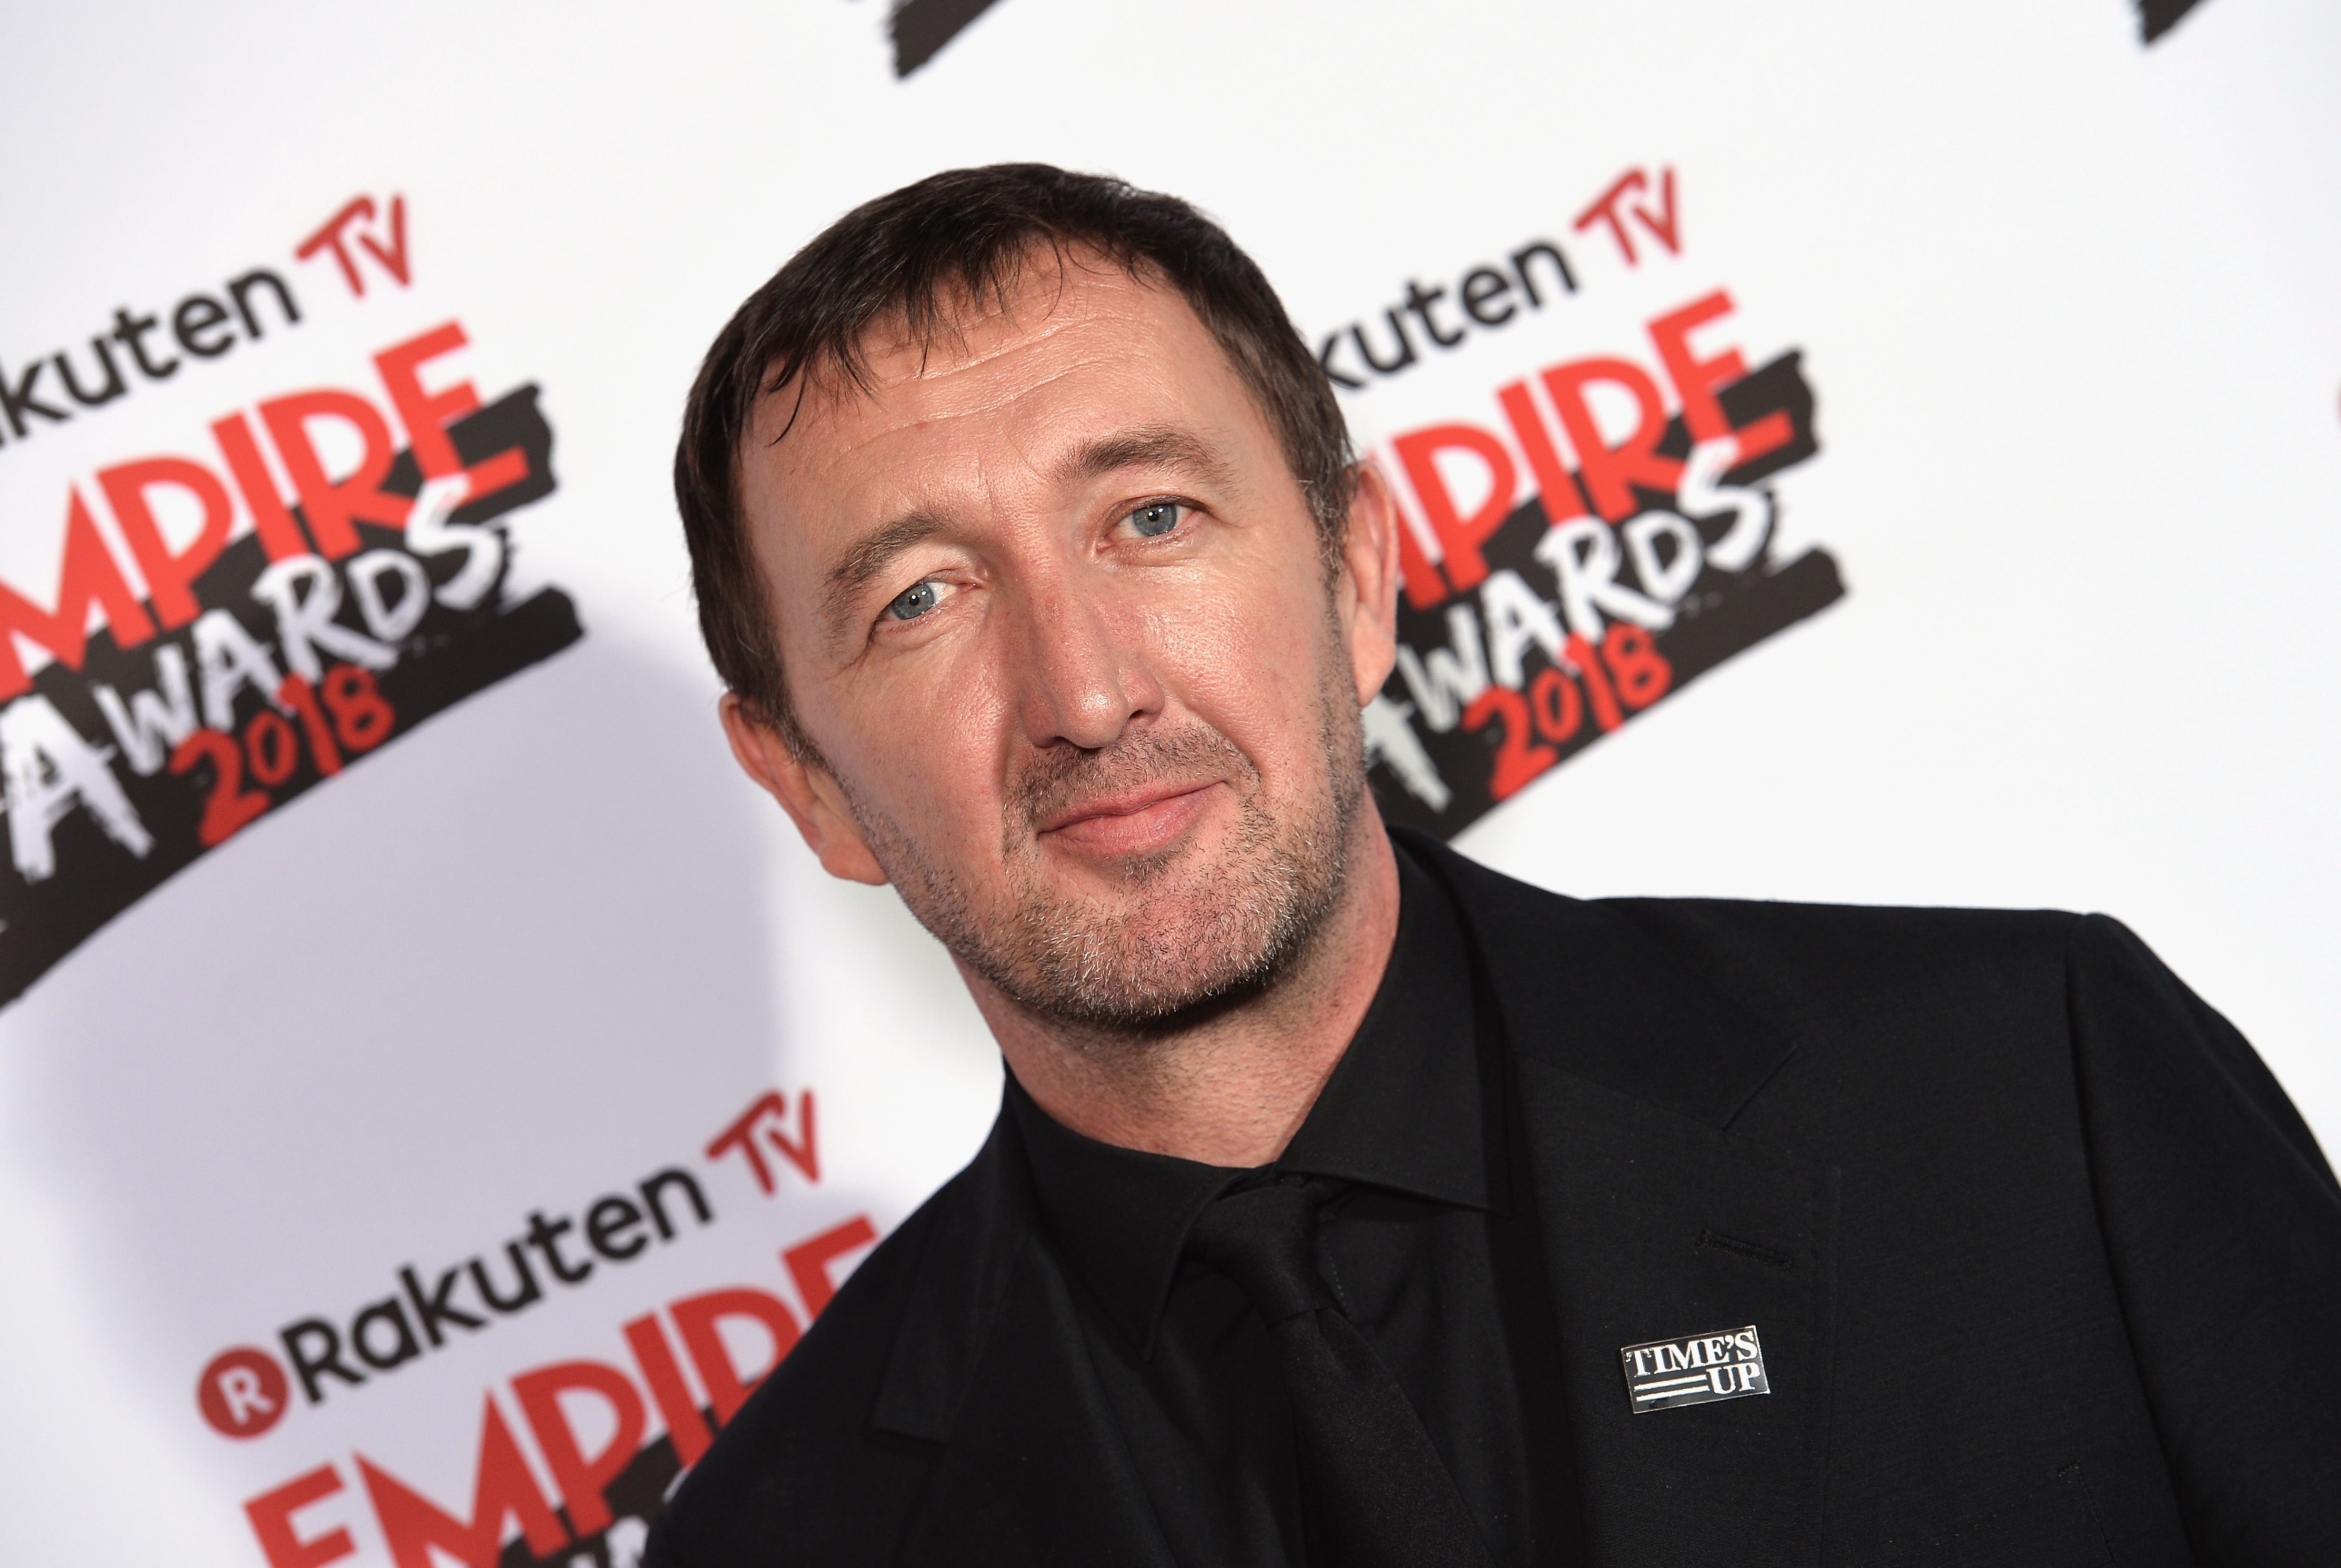 Ralph Ineson at the Empire Awards in London in 2018